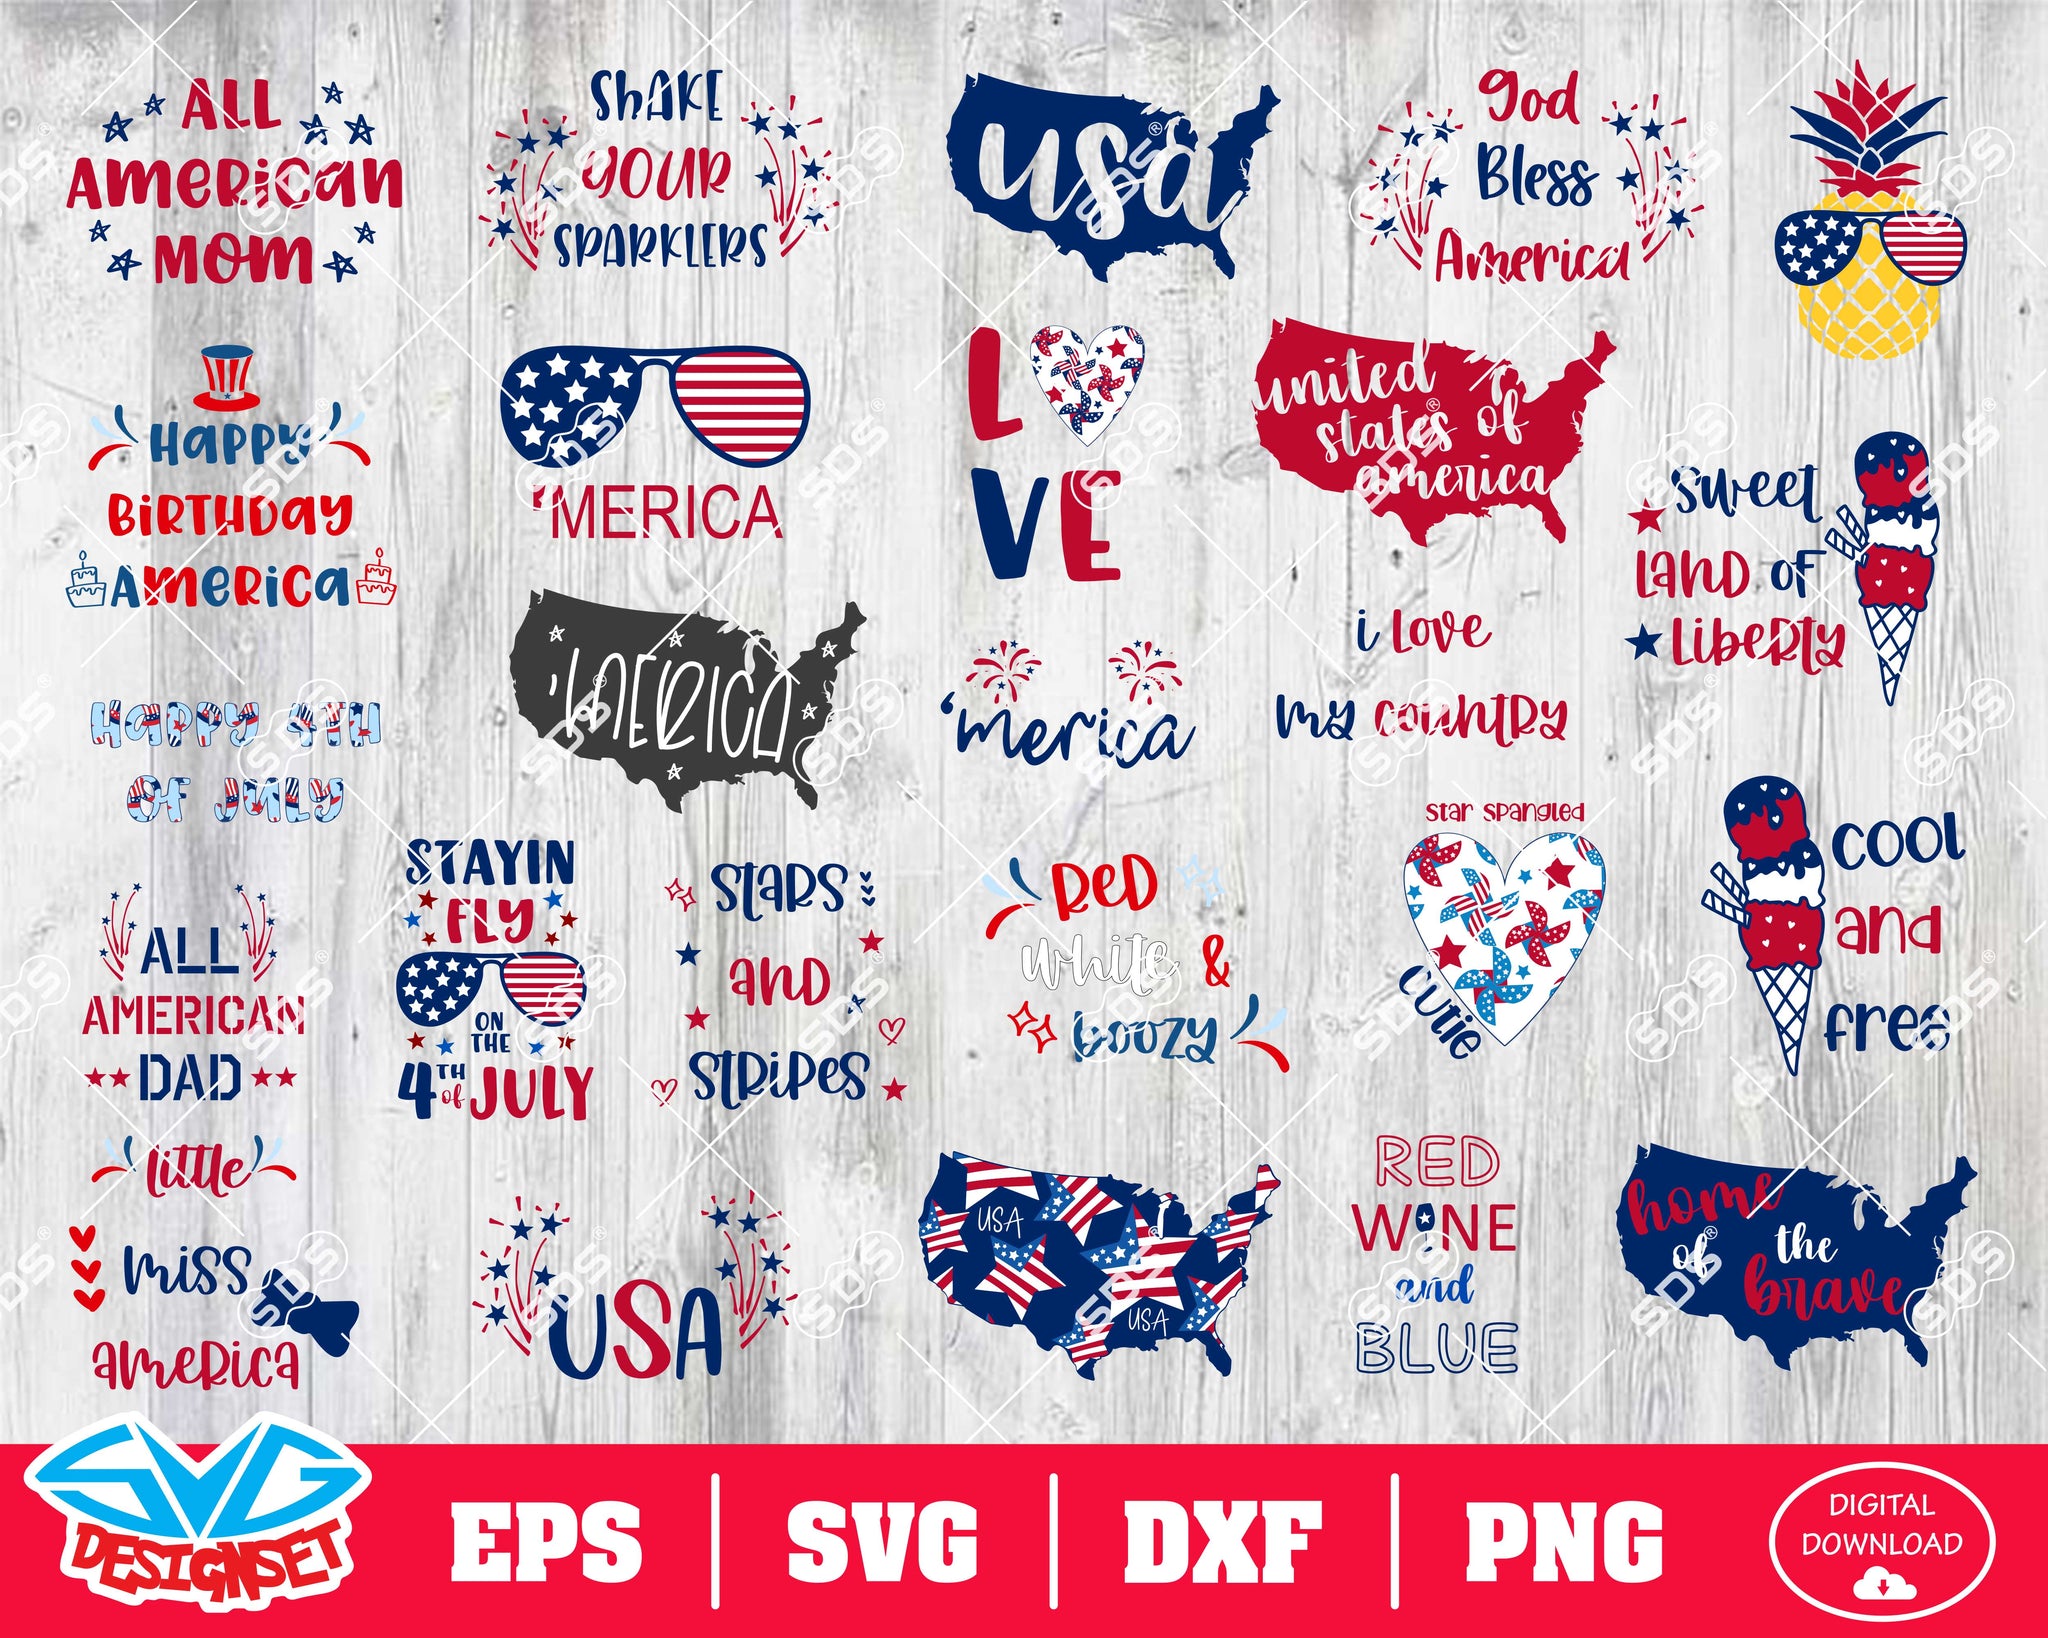 Fourth of July Svg, Dxf, Eps, Png, Clipart, Silhouette and Cutfiles #18 - SVGDesignSets